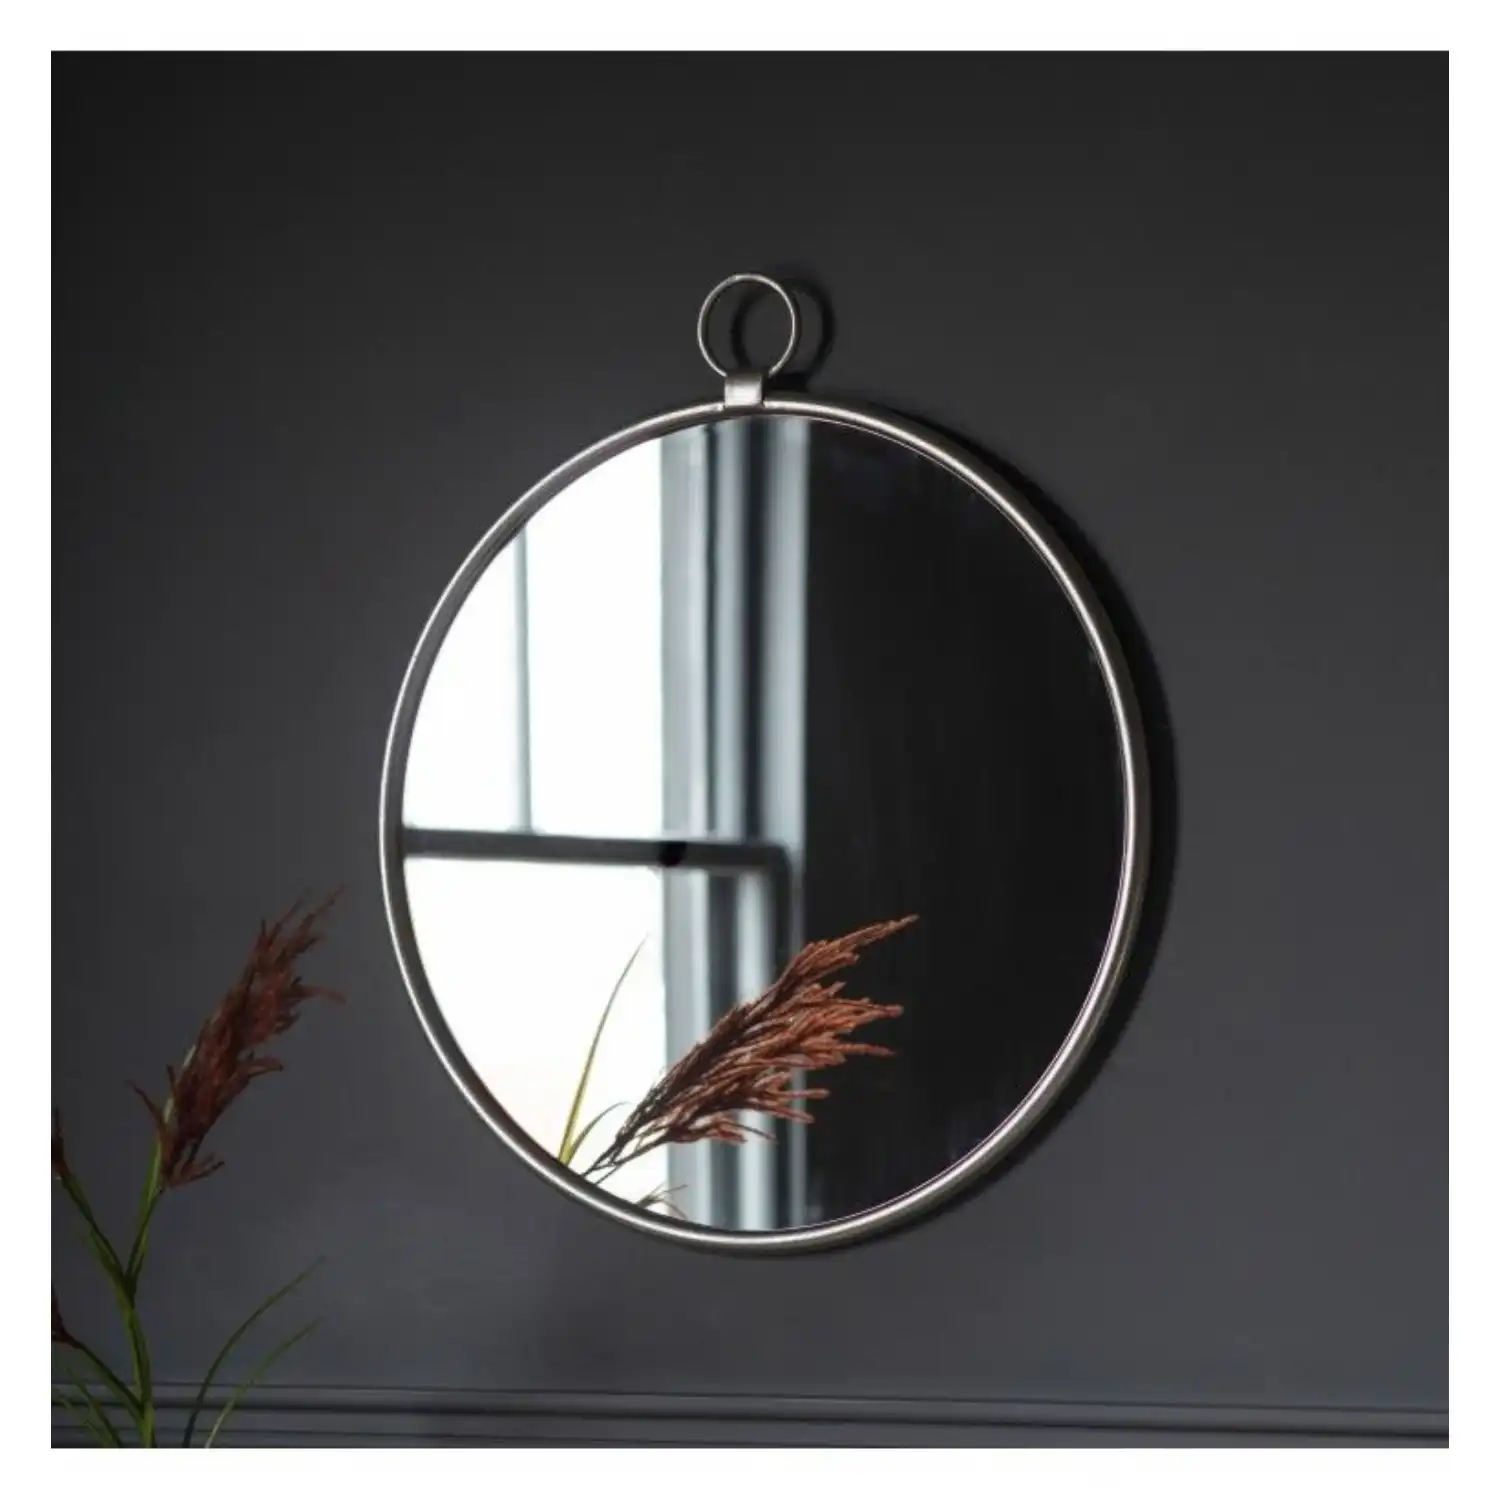 Silver Round Wall Mirror with Ring Hanging Loop Top